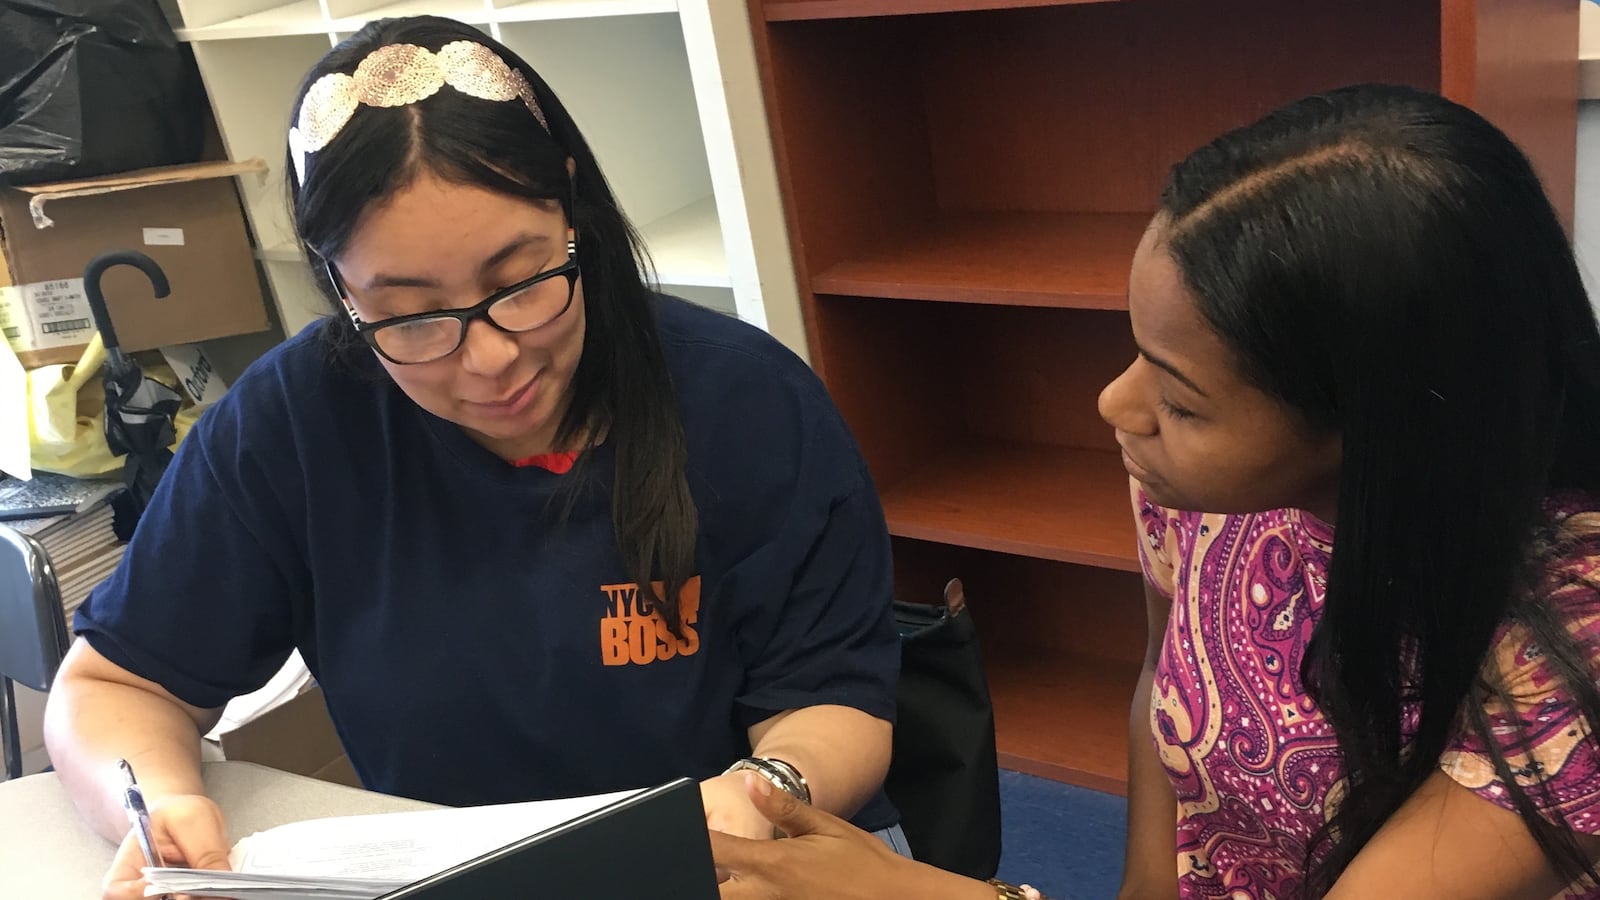 The author Jahira Chambers, right, working with a student.